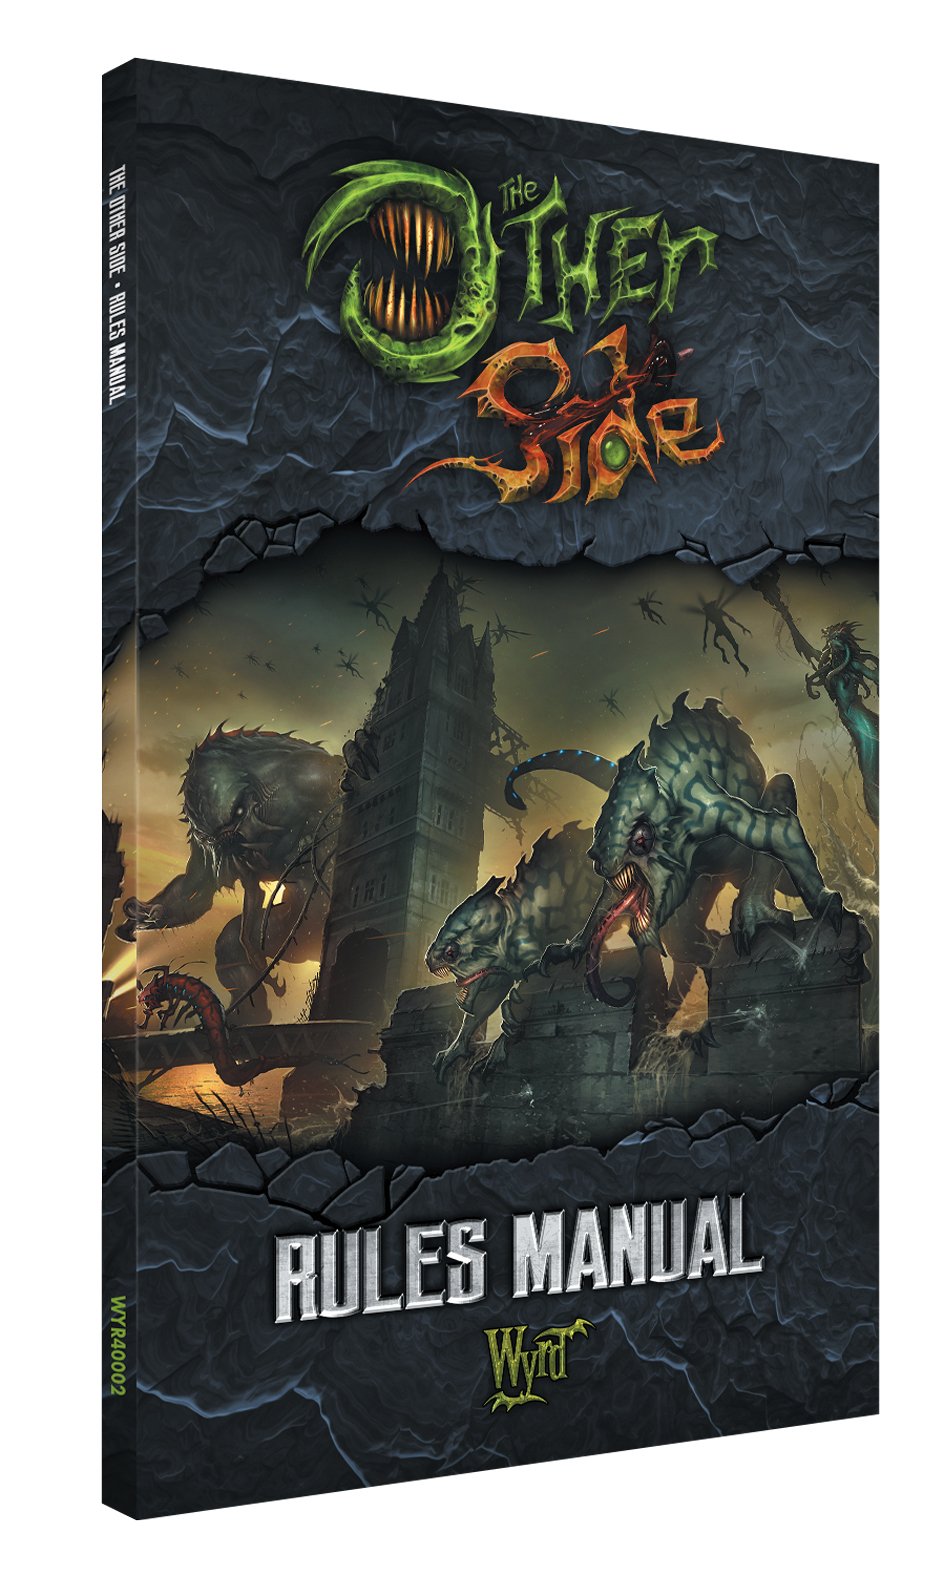 The other side rules manual cover